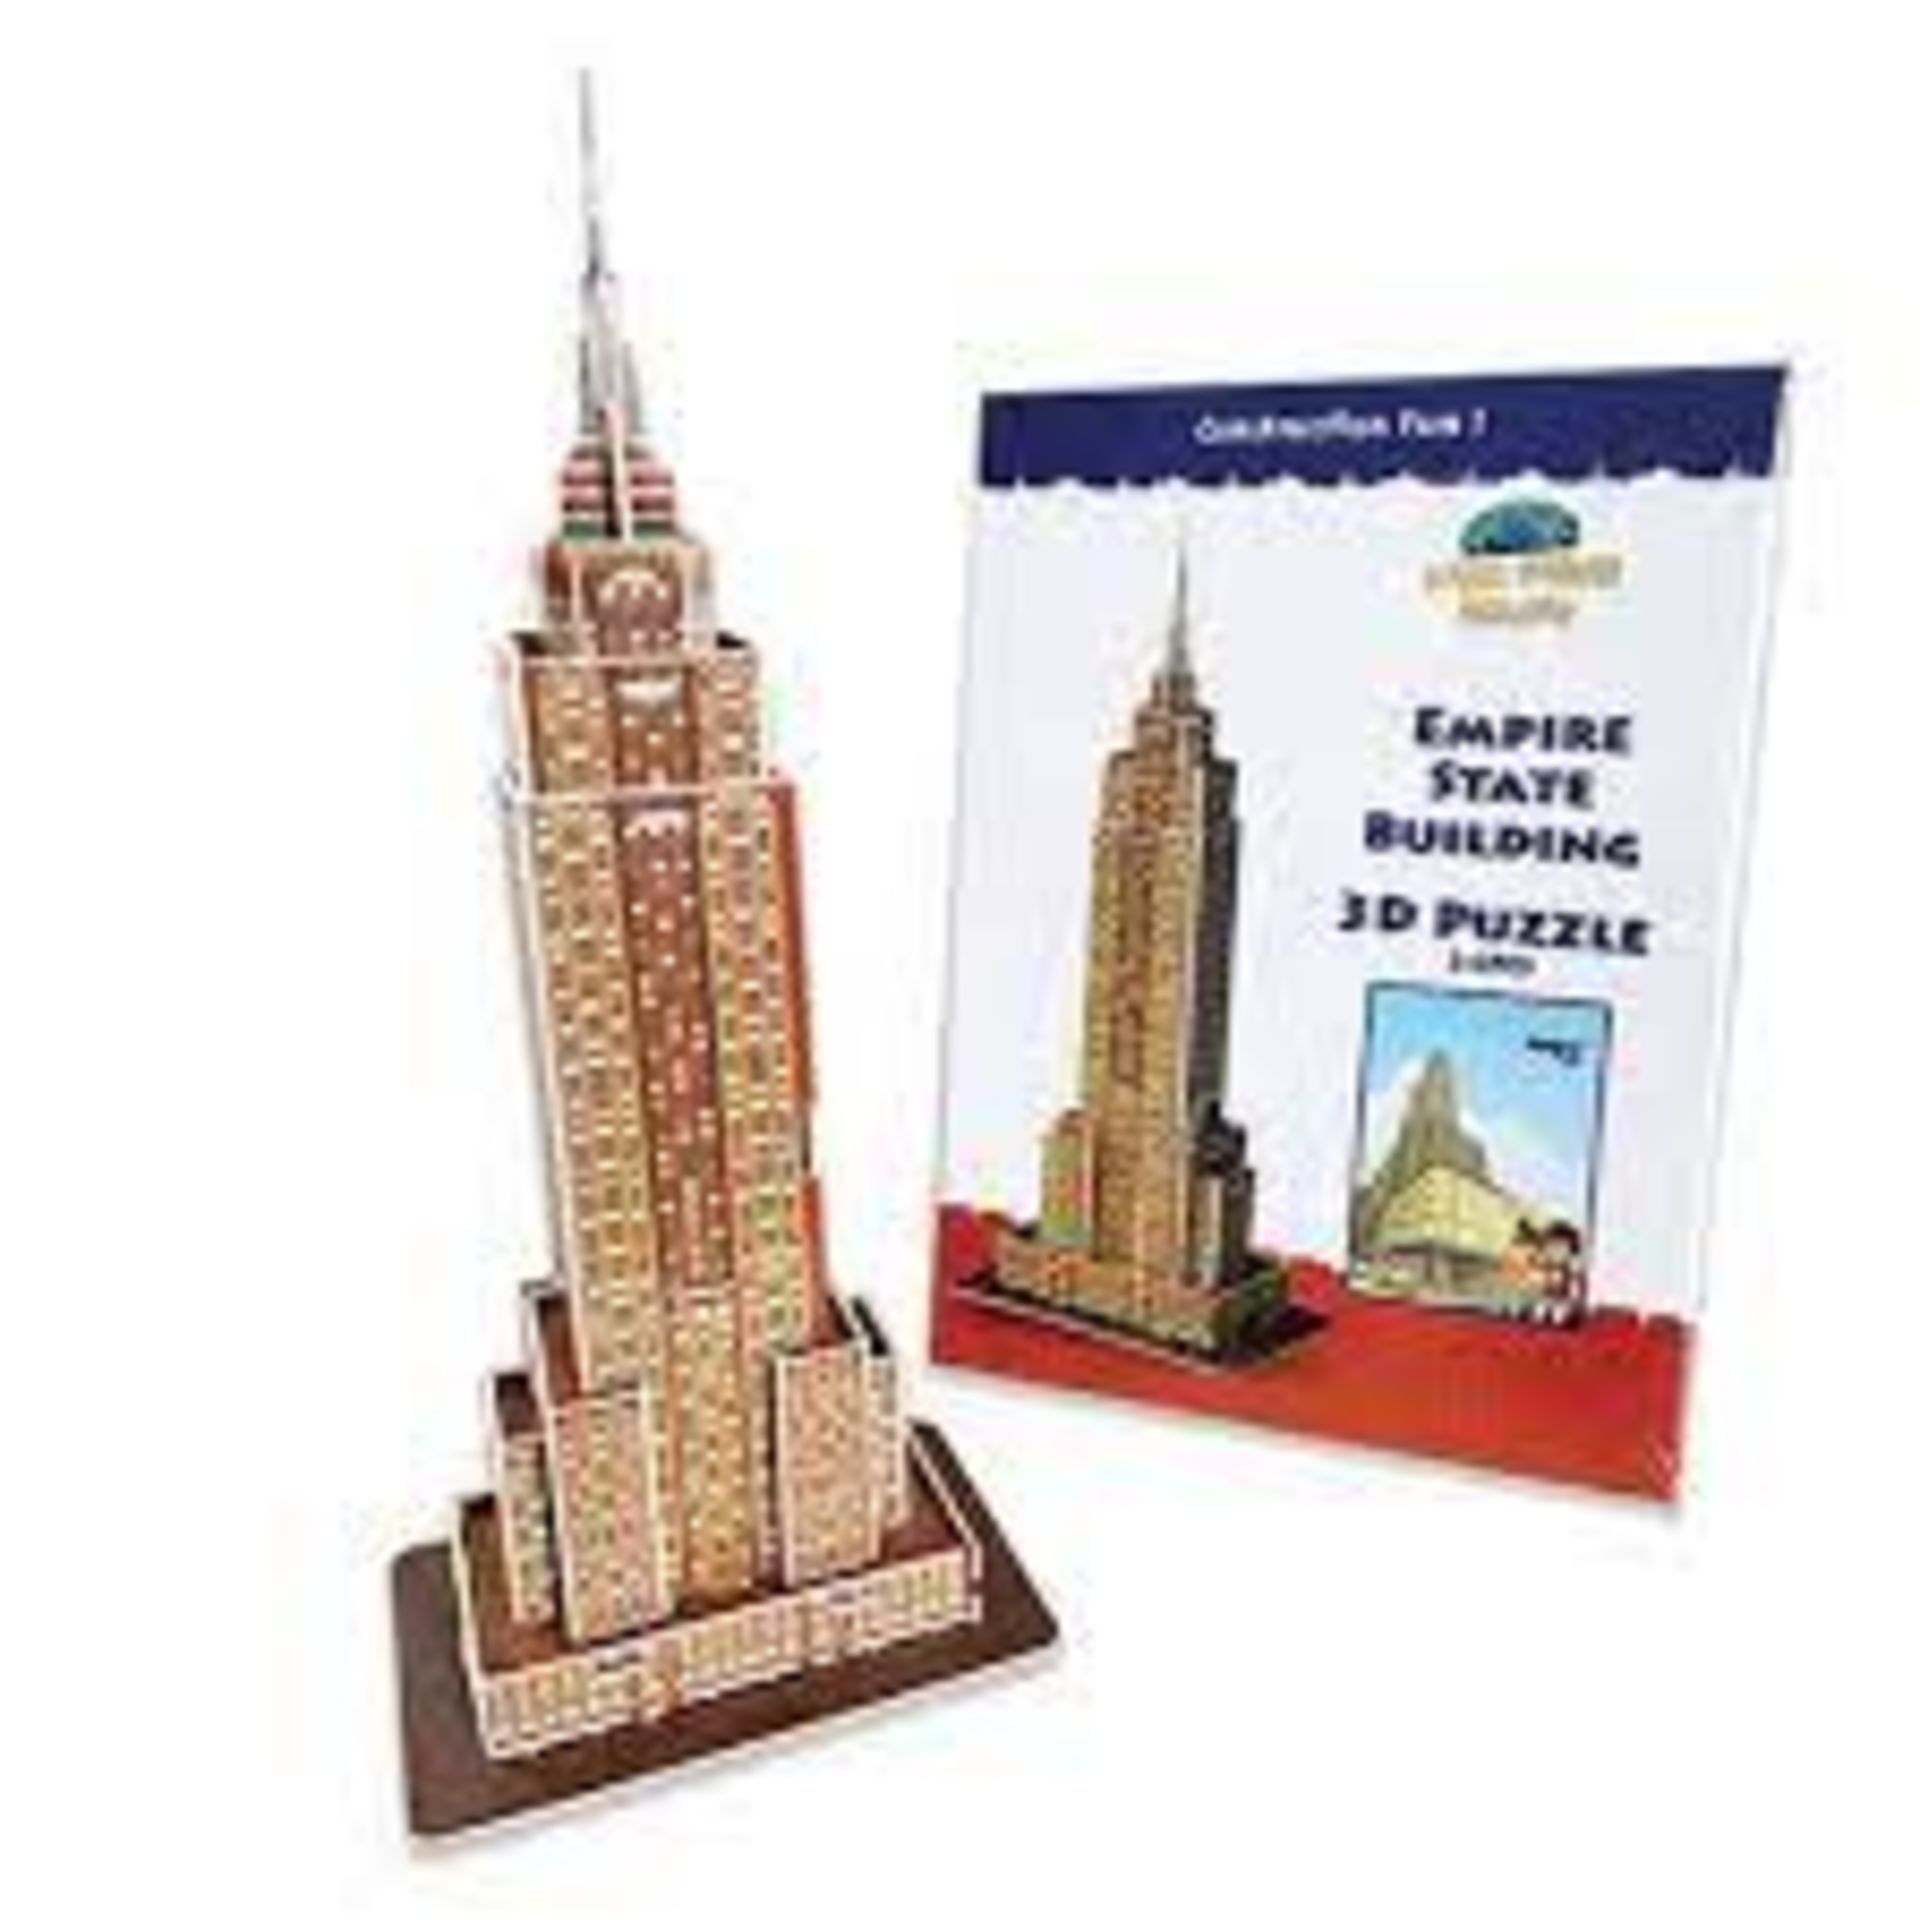 30 X BRAND NEW EDUCTAIONAL EMPIRE STATE 3D PUZZLES